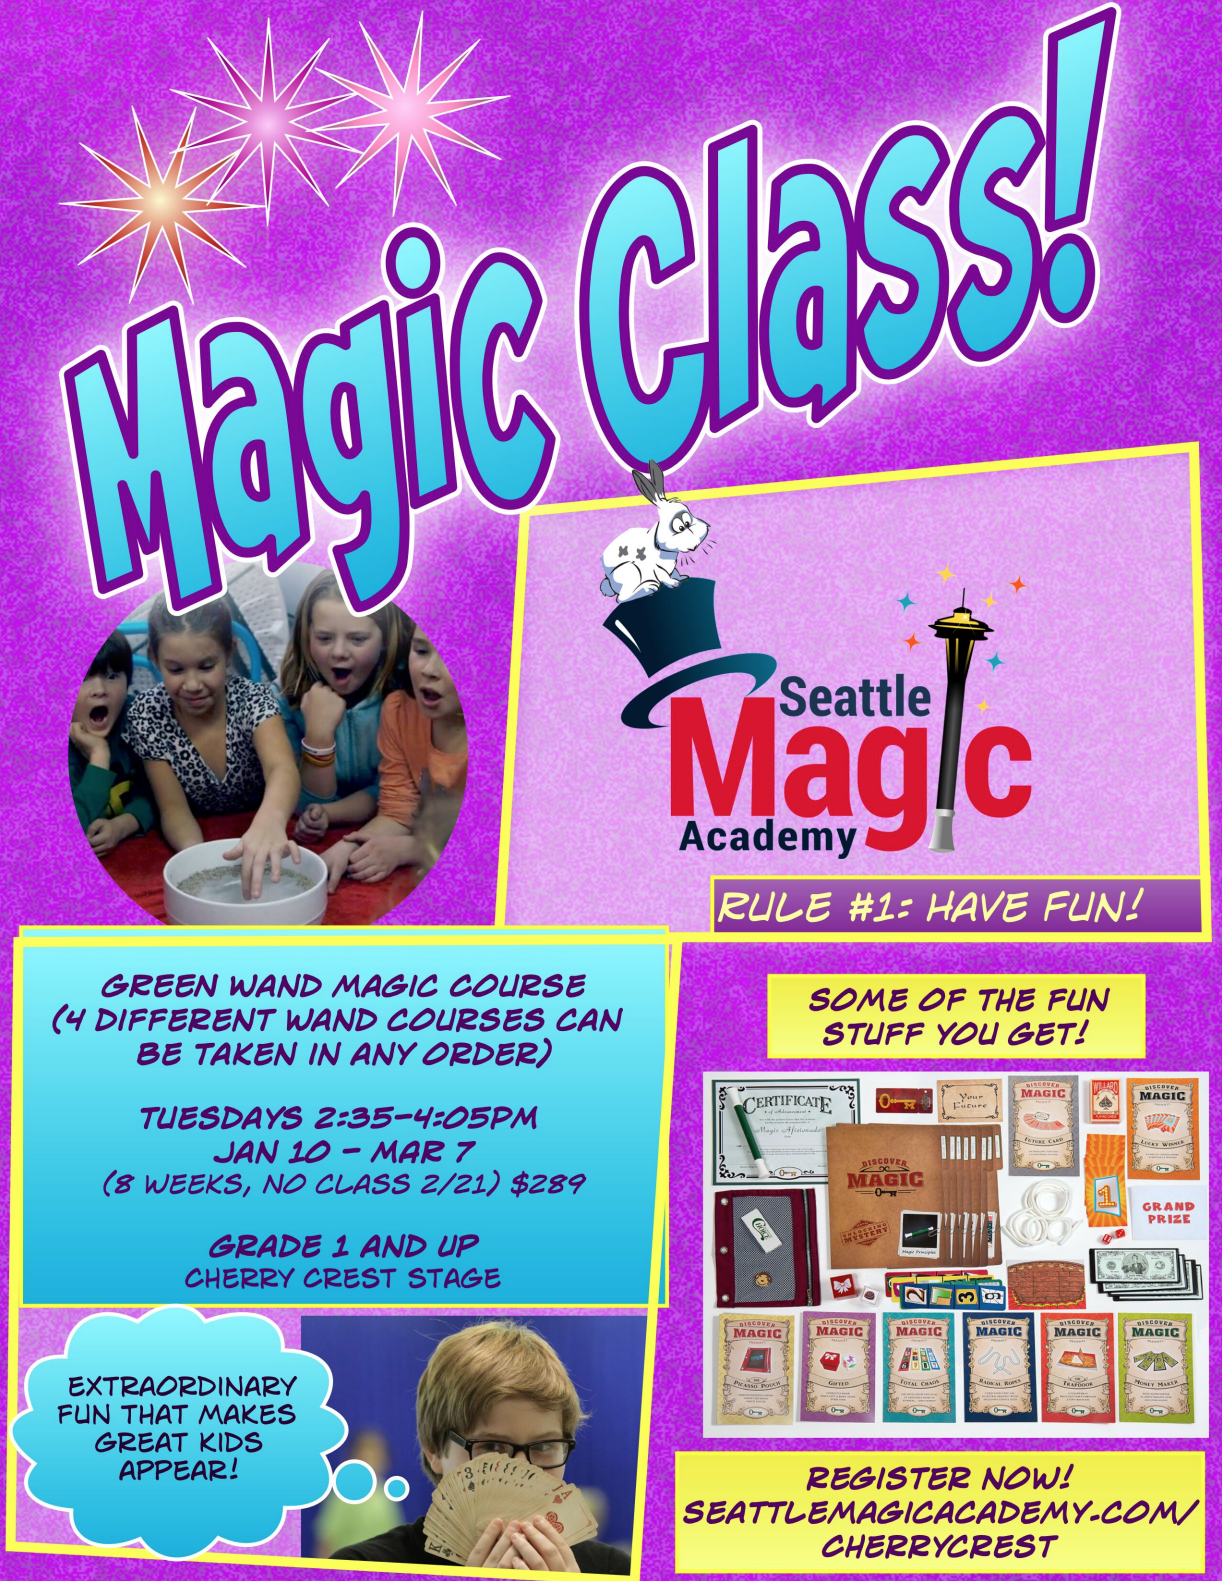 Green Wand Magic After-School Class with Seattle Magic Academy